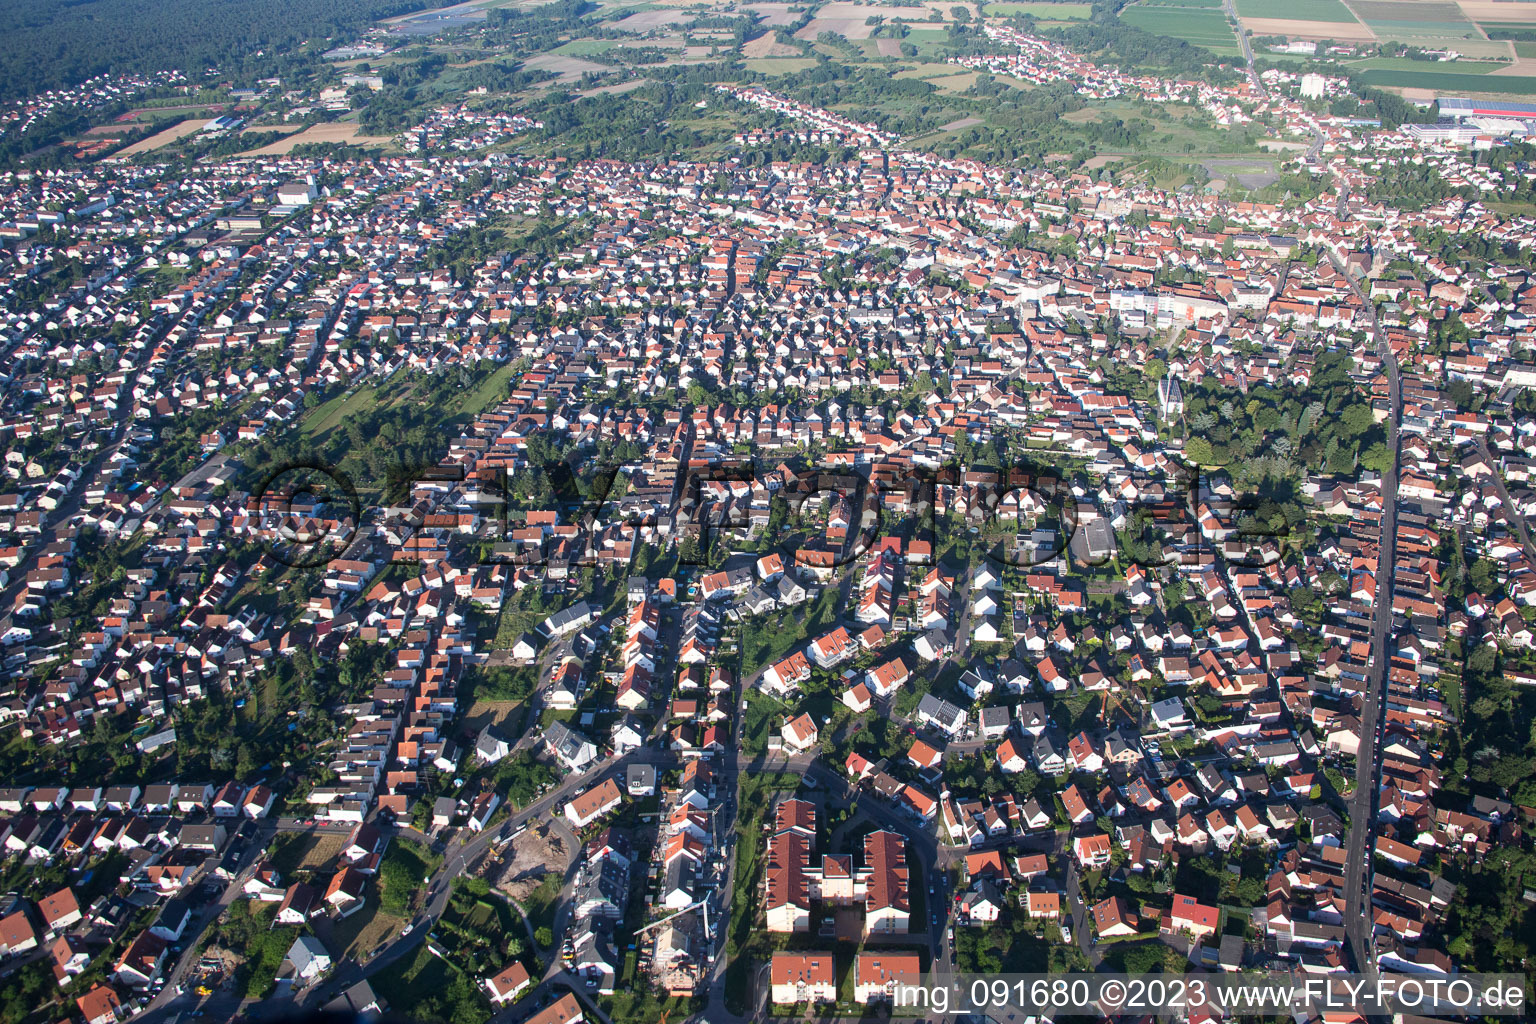 Schifferstadt in the state Rhineland-Palatinate, Germany from the plane